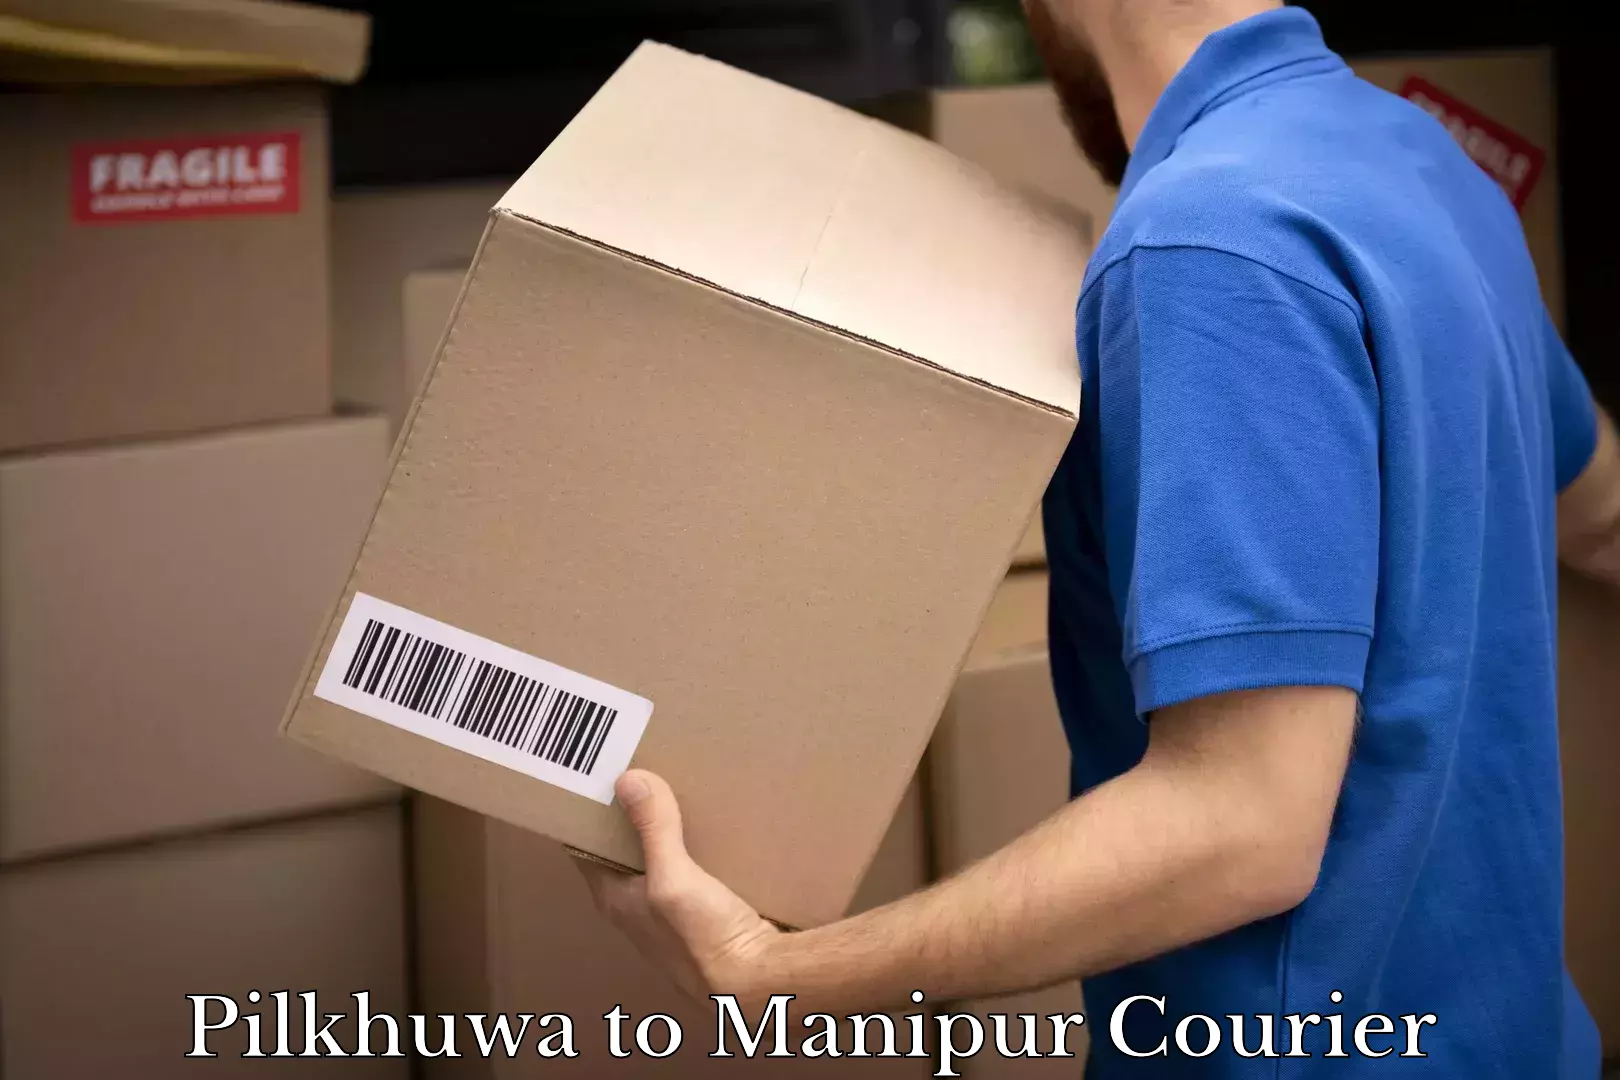 24-hour courier service Pilkhuwa to Manipur